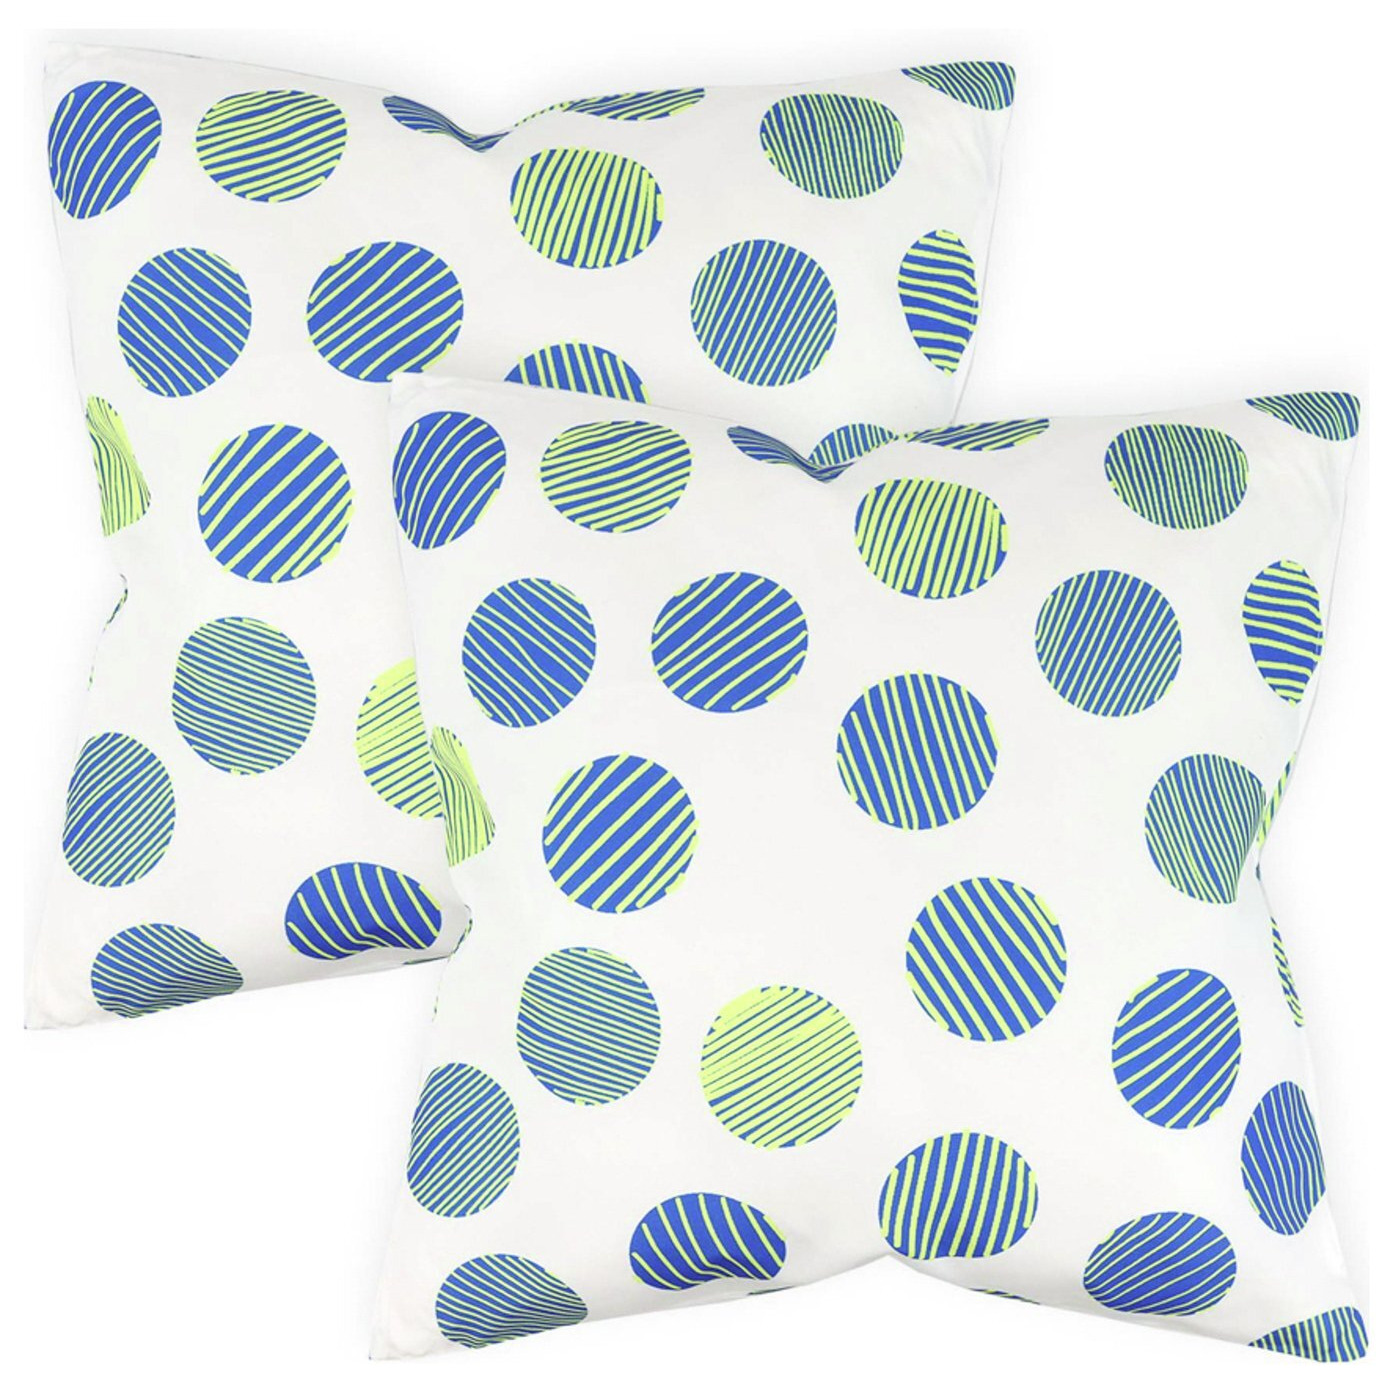 Streetwize Polka Dot Outdoor Cushions - Pack of 4 - image 1